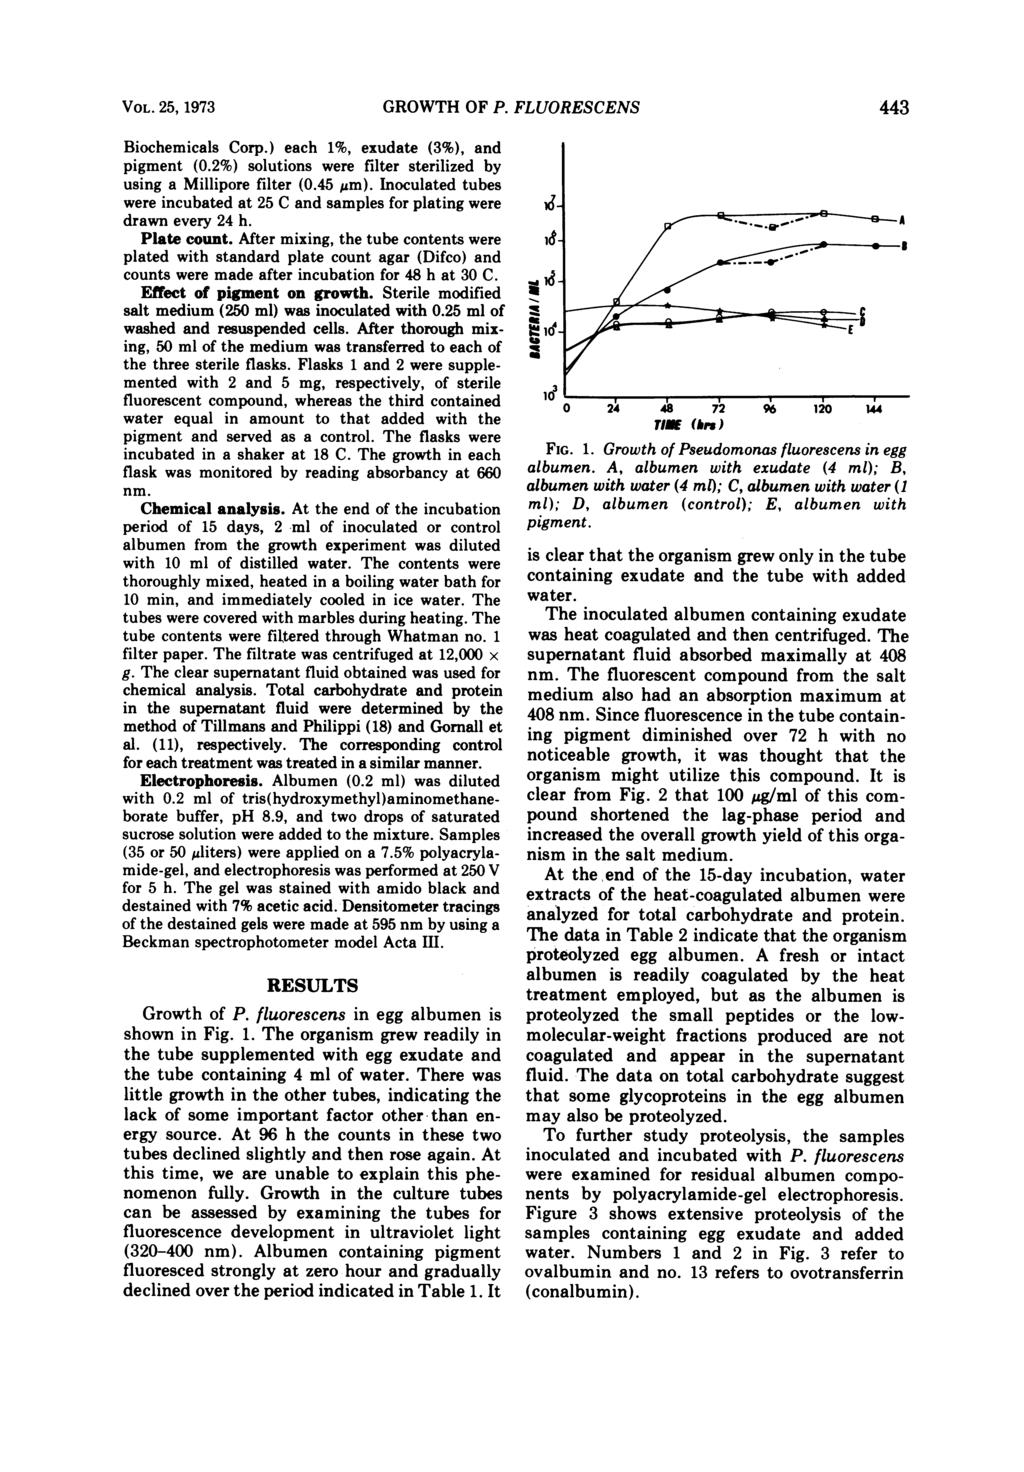 VOL. 25, 1973 GROWTH OF P. FLUORESCENS 443 Biochemicals Corp.) each 1%, exudate (3%), and pigment (0.2%) solutions were filter sterilized by using a Millipore filter (0.45 um).